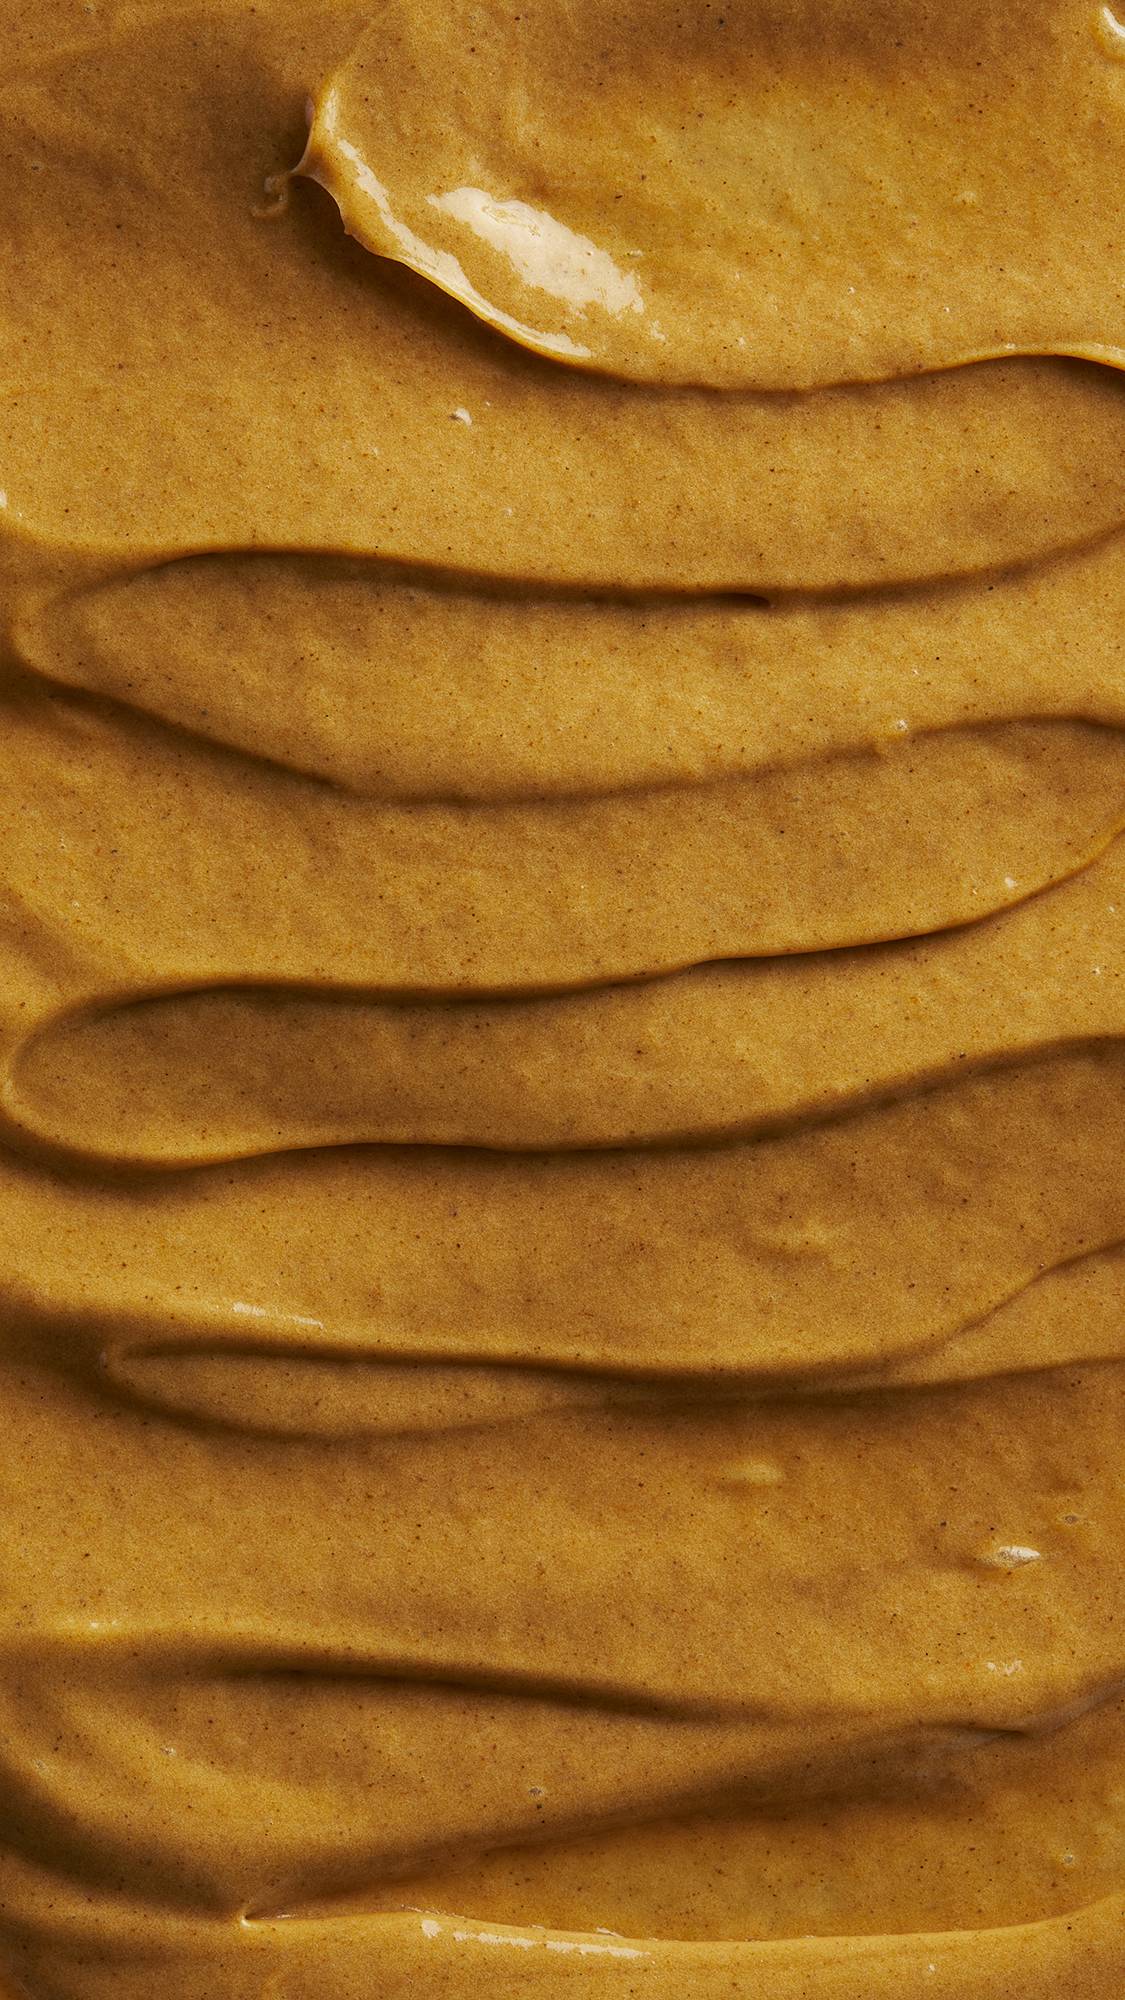 Image is a very defined close-up of the thick, batter-like golden-brown hot oil treatment spread over the screen.